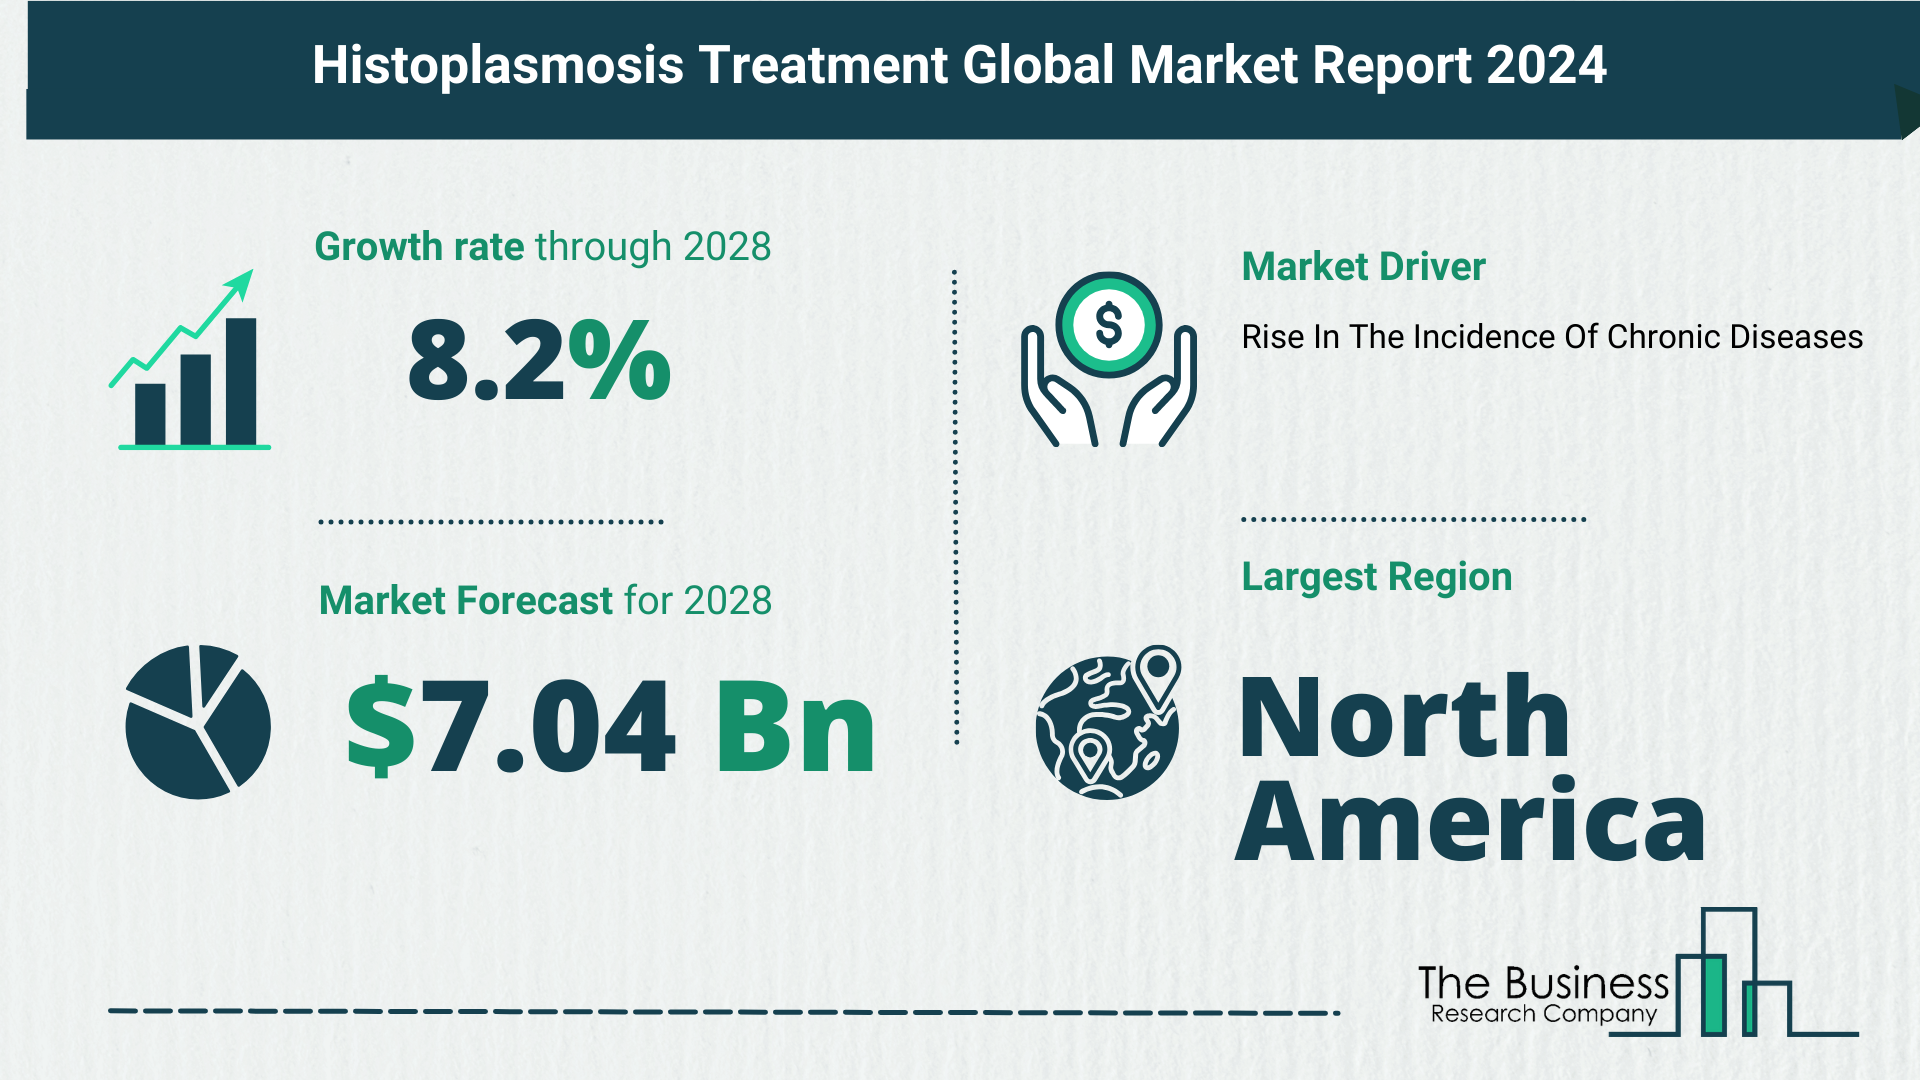 Top 5 Insights From The Histoplasmosis Treatment Market Report 2024